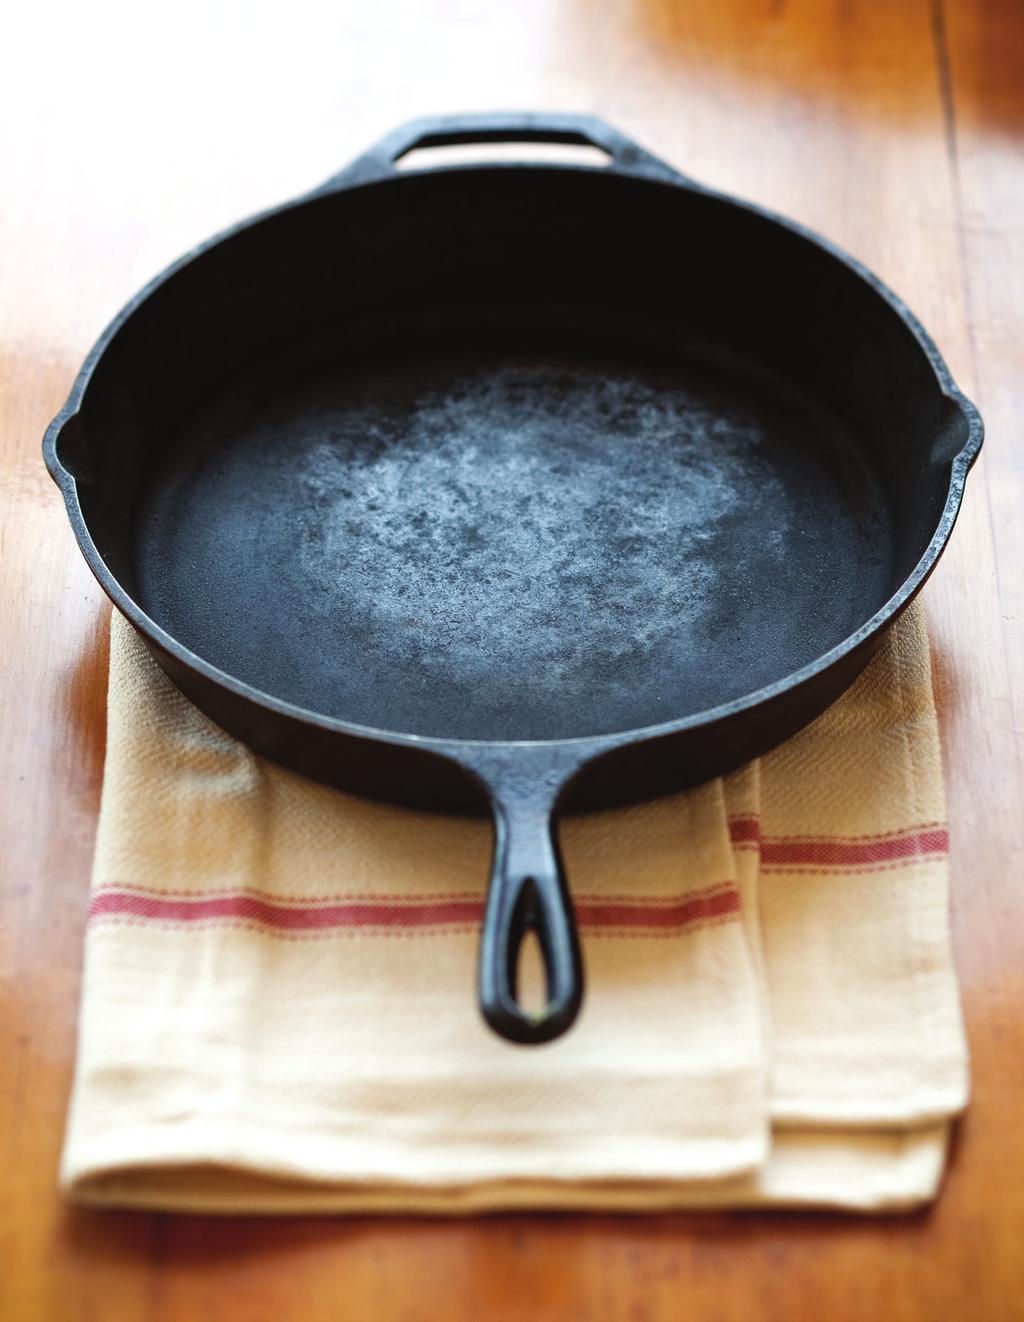 Cast-iron cookware is safe, adds iron to food, and is a joy to use. By Mary Gunderson Long associated with cowboy campfires and rustic cooking, cast-iron cookware is on the comeback trail.